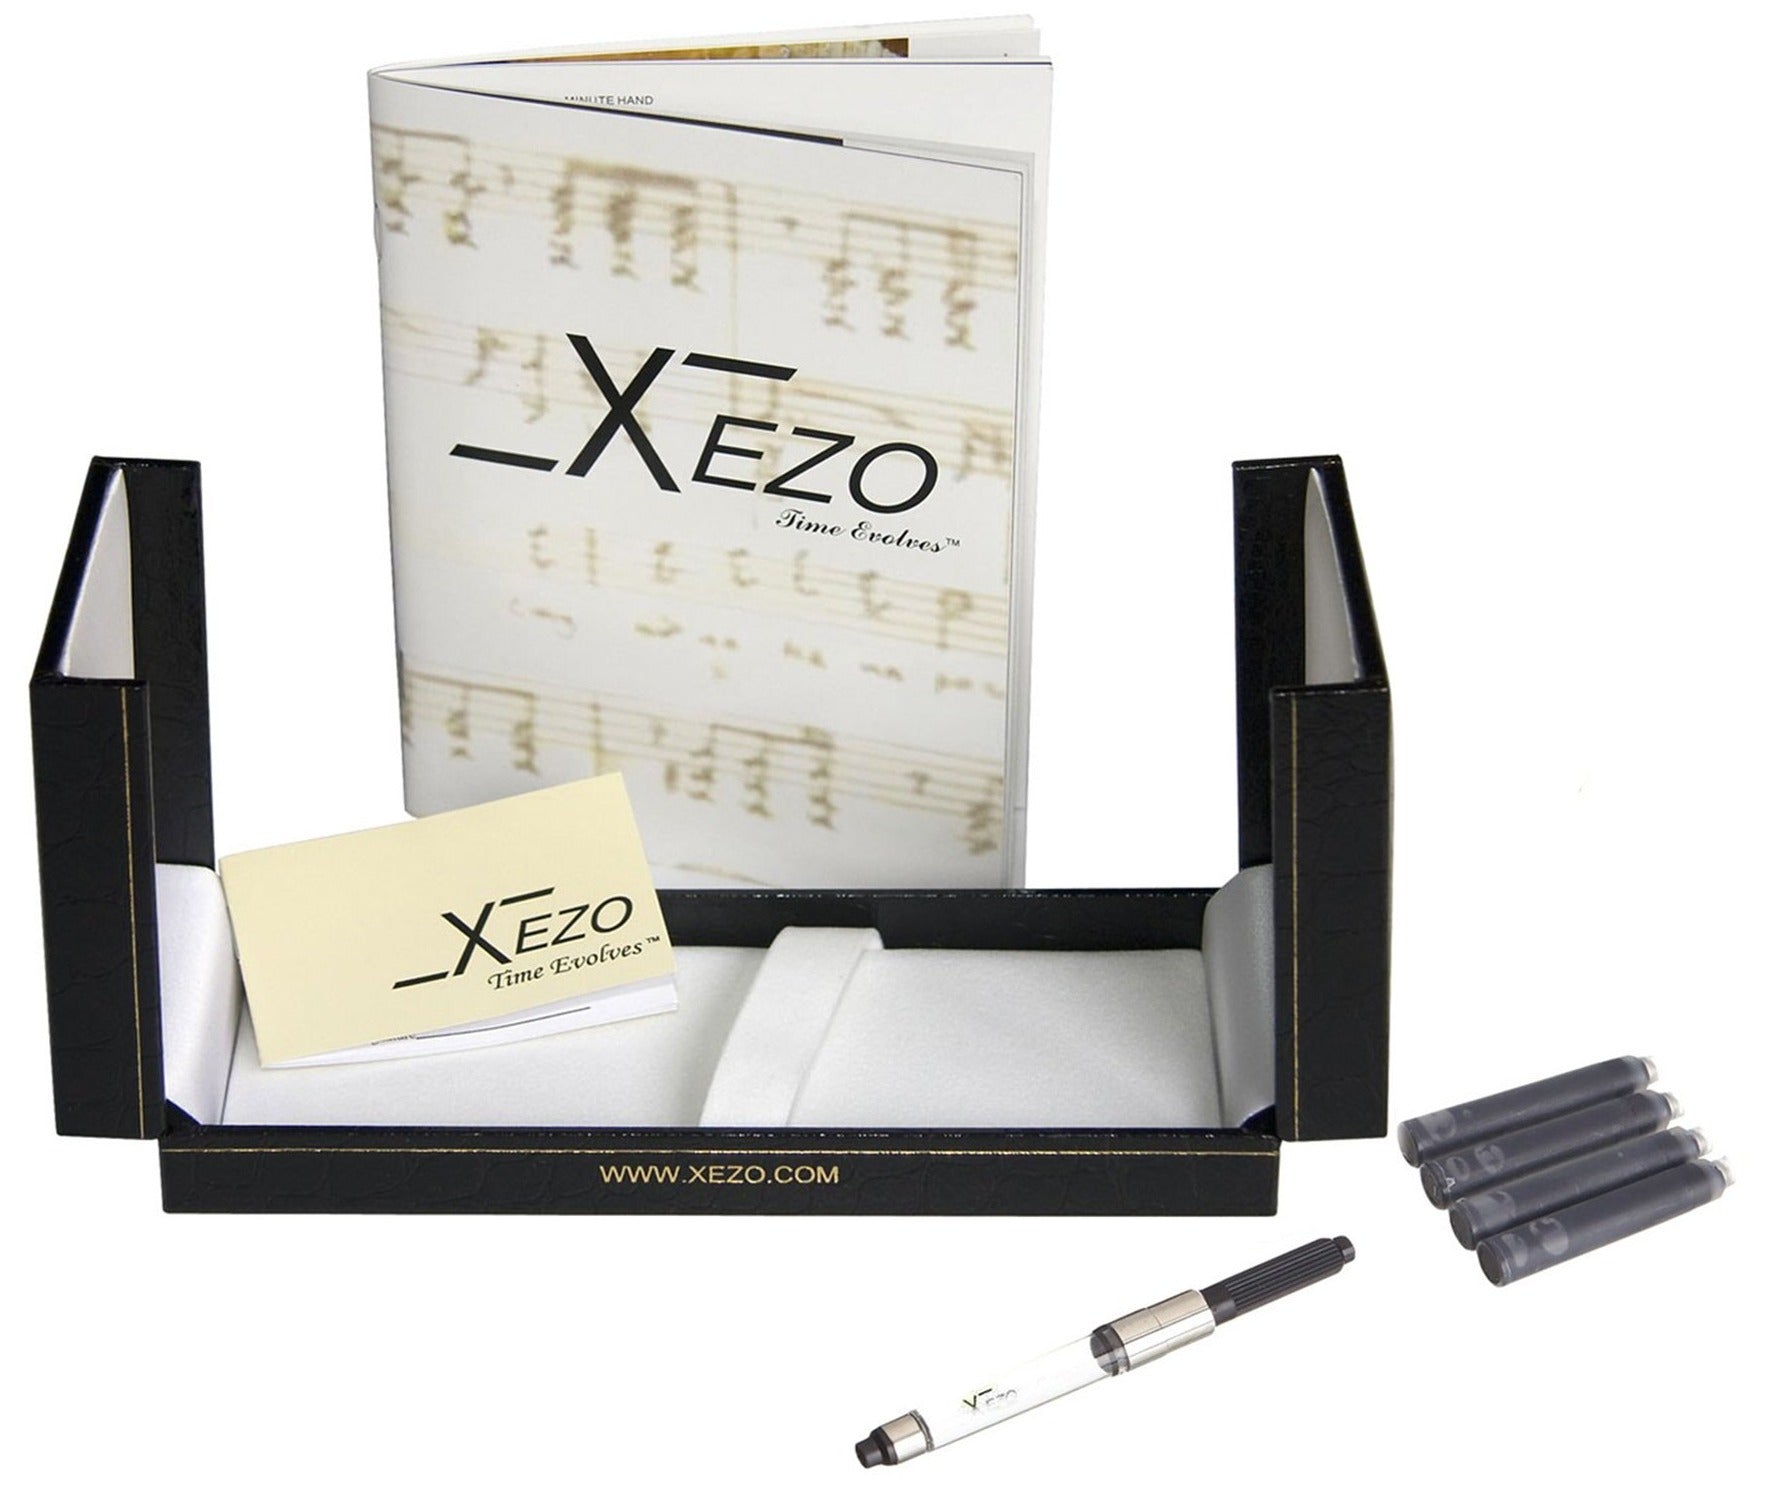 Xezo - Black gift box, certificate, manual, chrome-plated ink converter, and four ink cartridges of the Maestro Sea Shell FPG-1 fountain pen